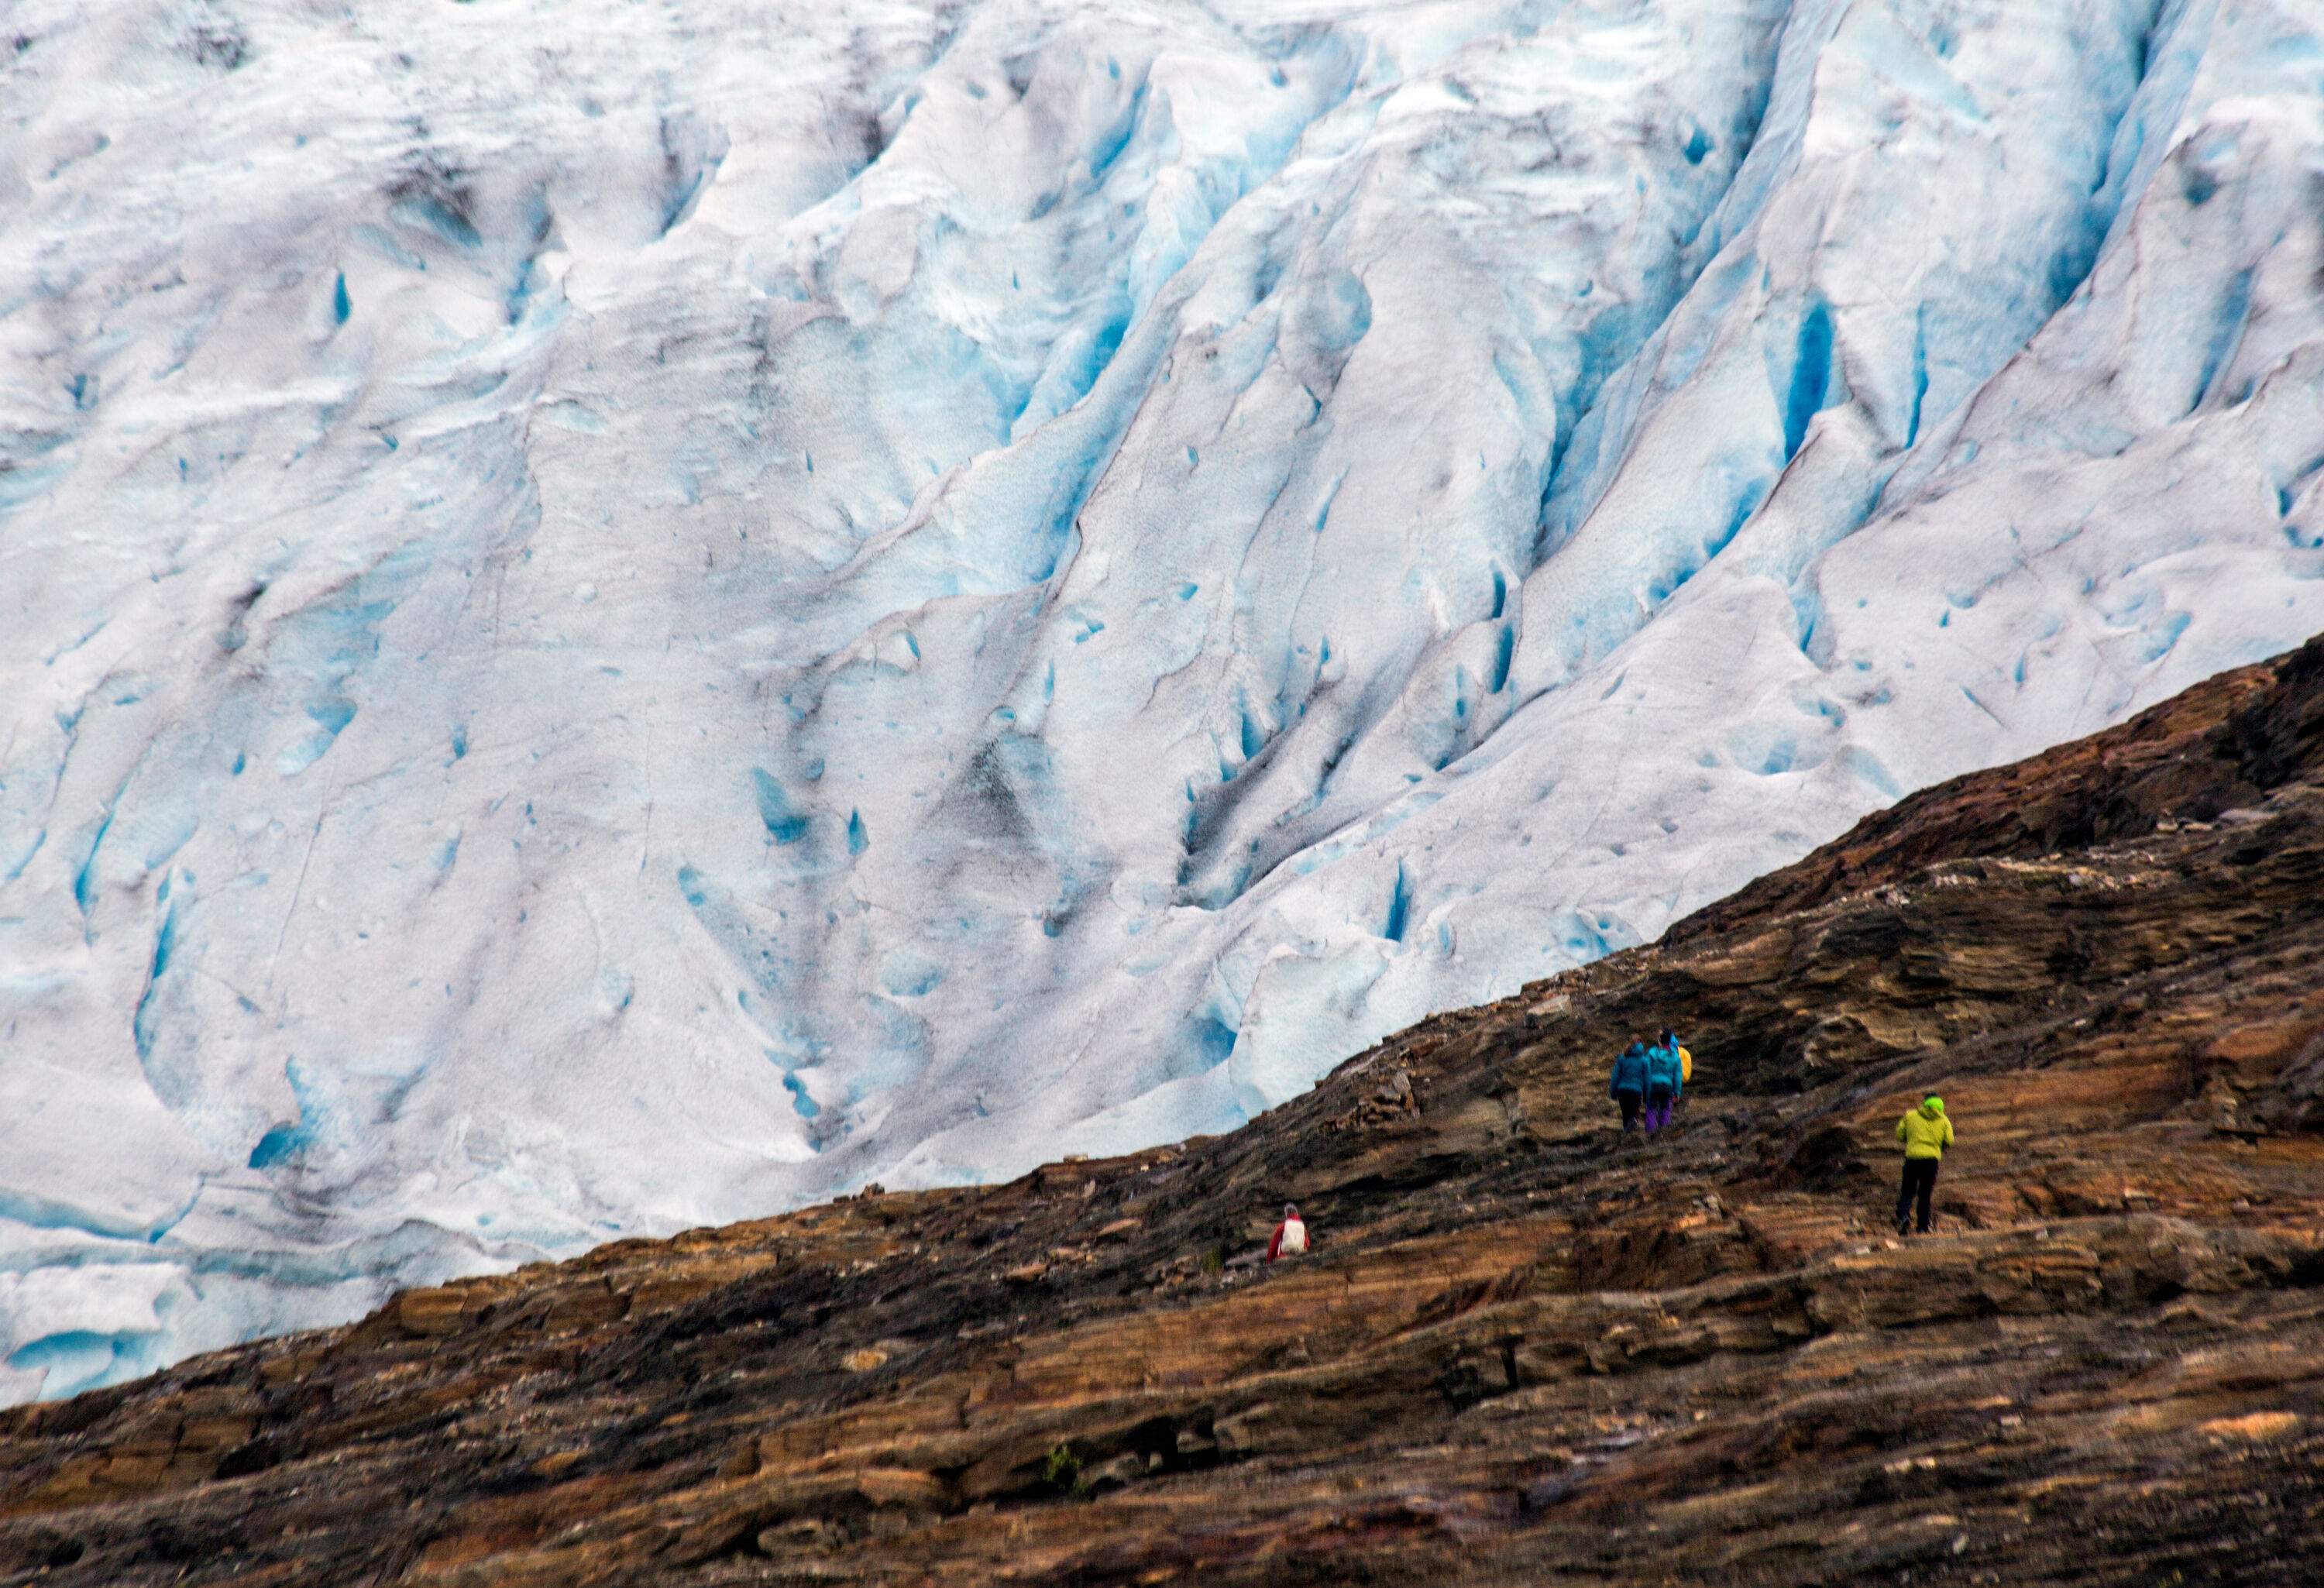 People walk on a rugged trail towards the massive ice formations of a glacier.